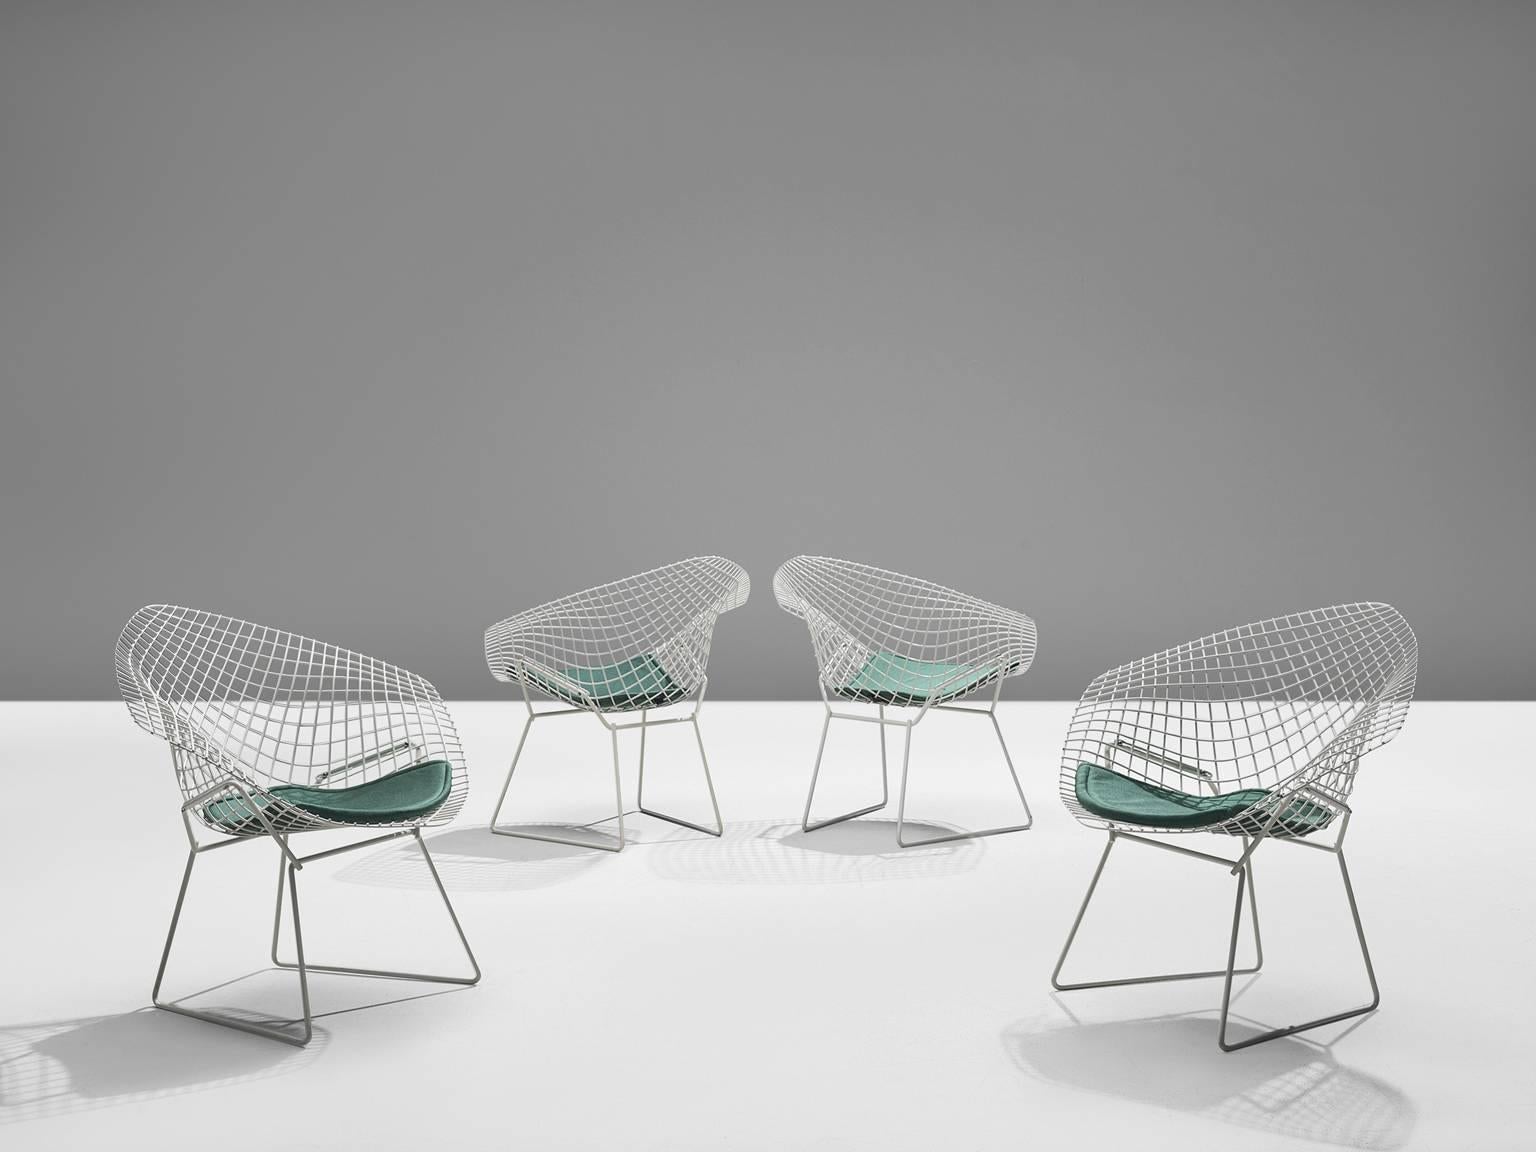 Set of four 'Diamond' chairs by Harry Bertoia for Knoll, metal, turquoise cushion, 1950s, (later production)
The Diamond Chair is, according to Knoll, an astounding study in space, form and function by one of the master sculptors of the last